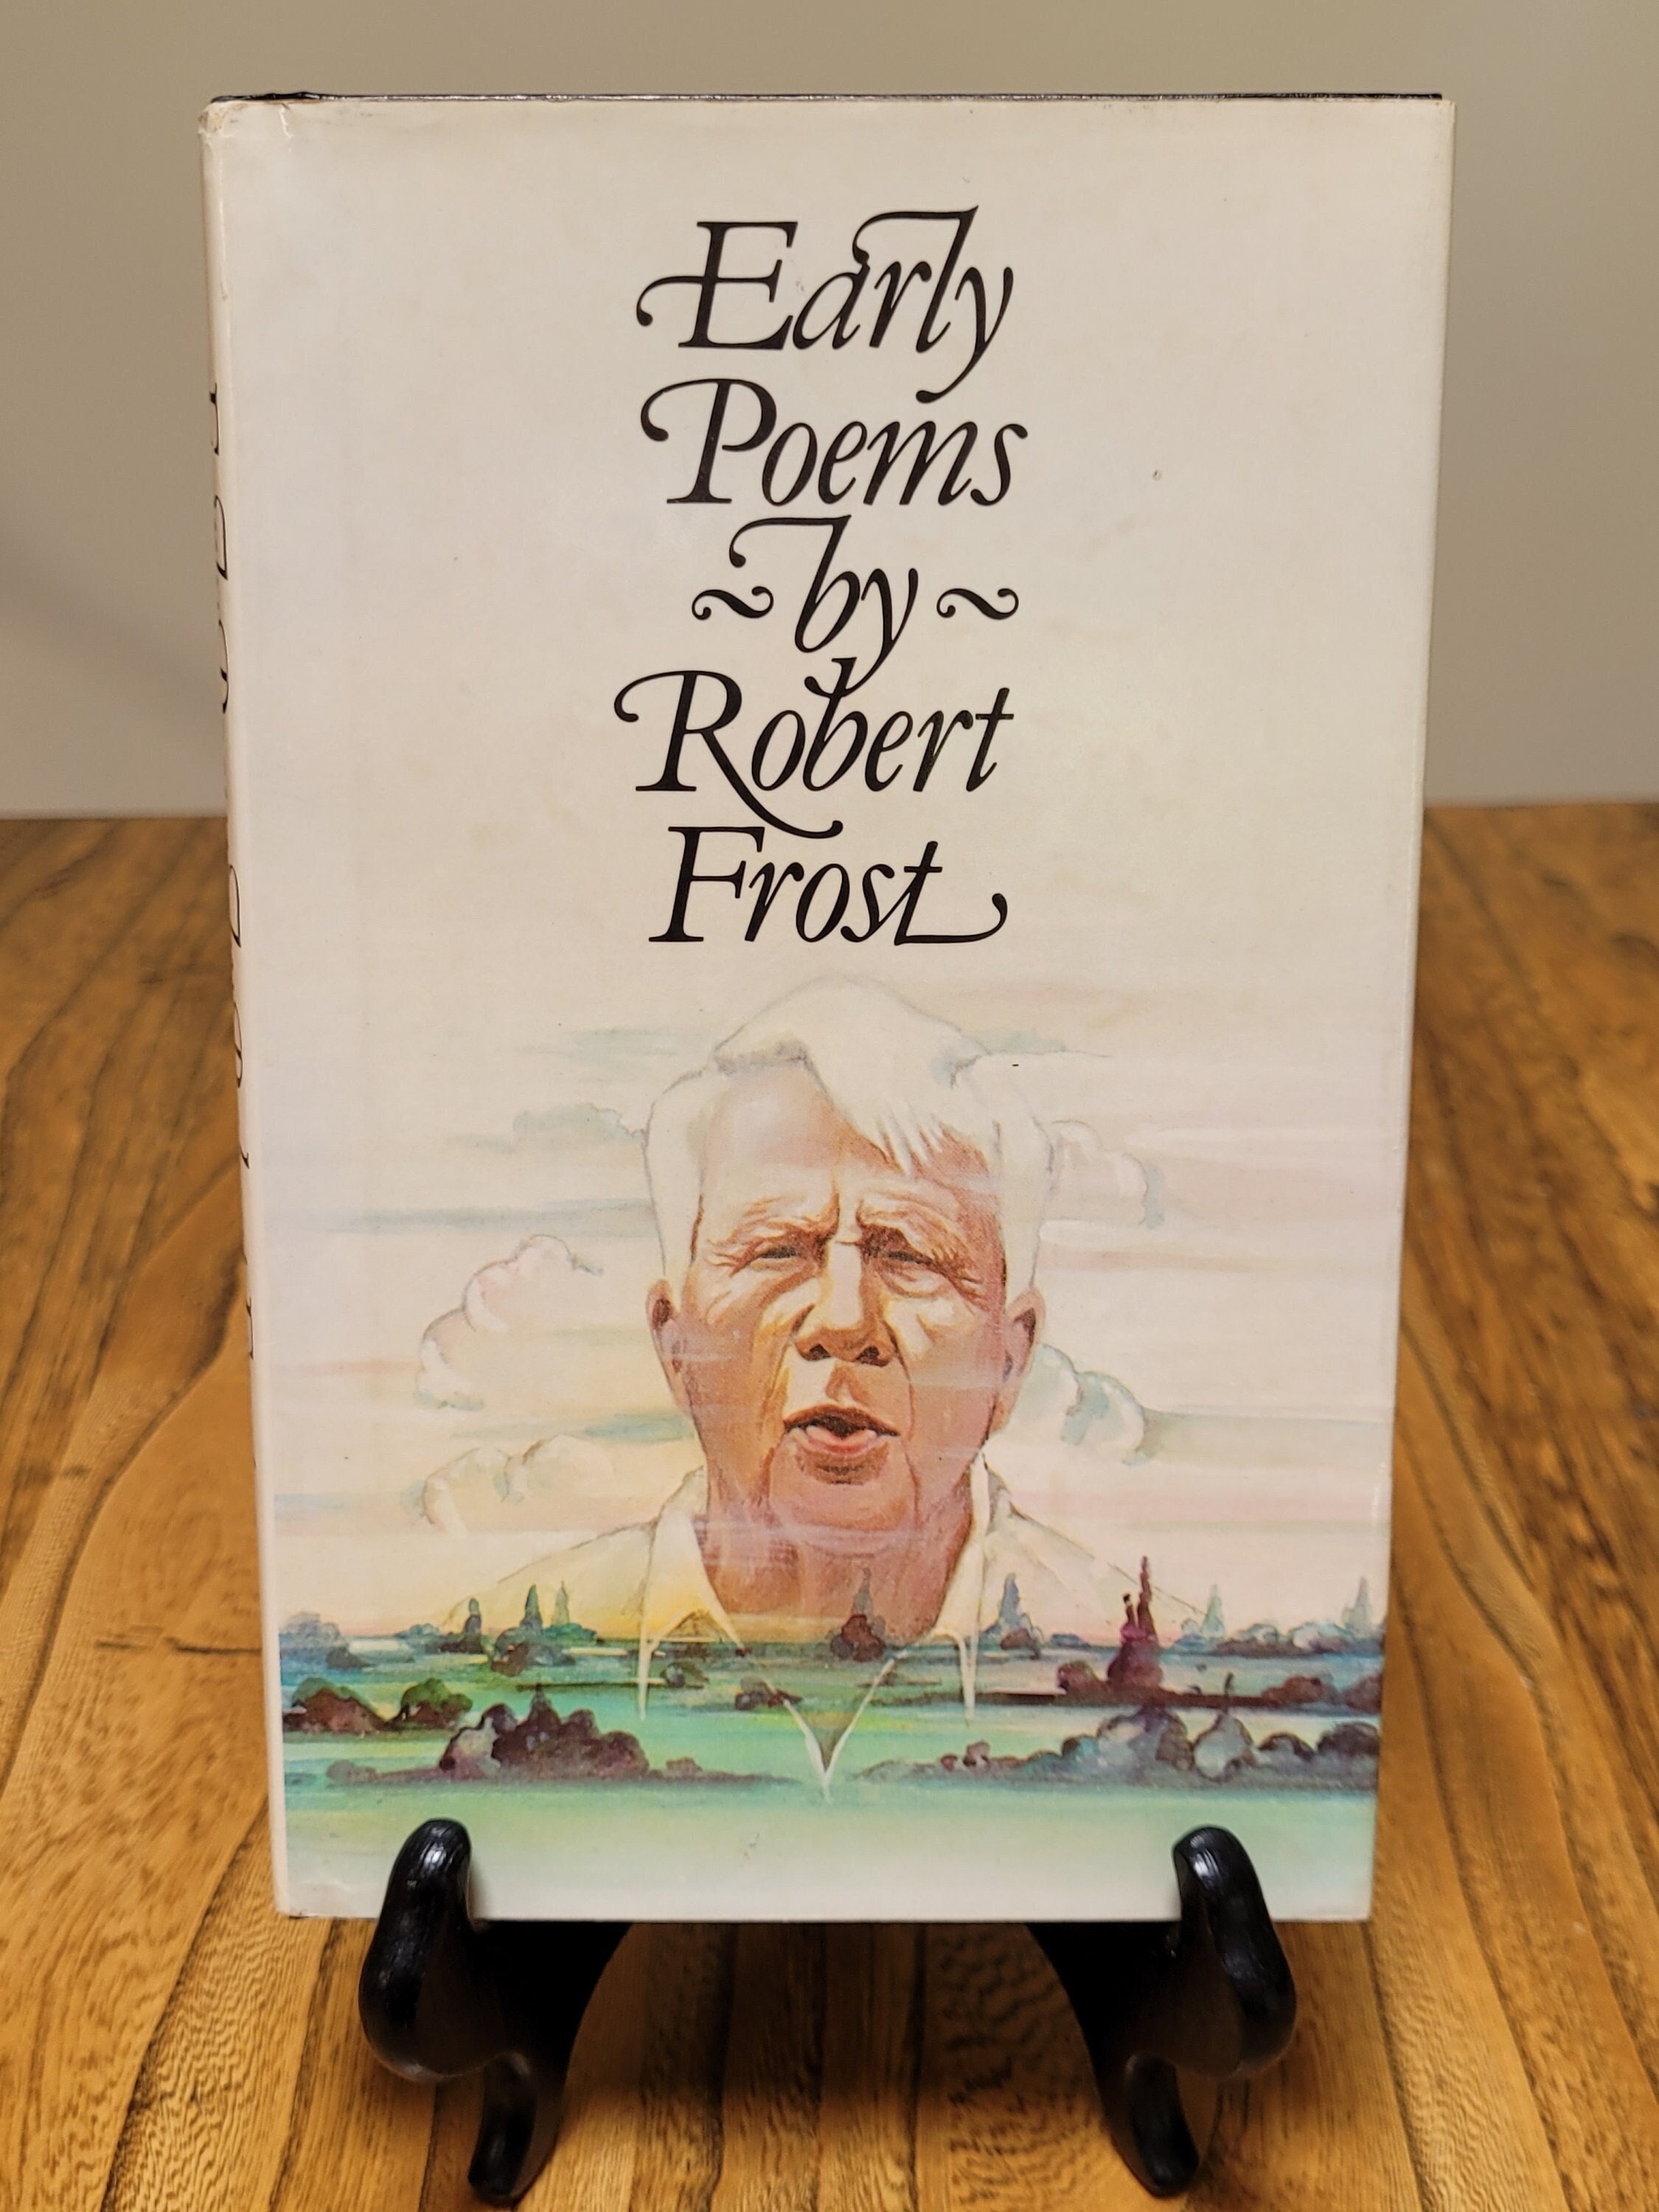 Early Poems by Robert Frost, 1981 Avenel edition including poems from A Boys Will and North of Boston. pic picture